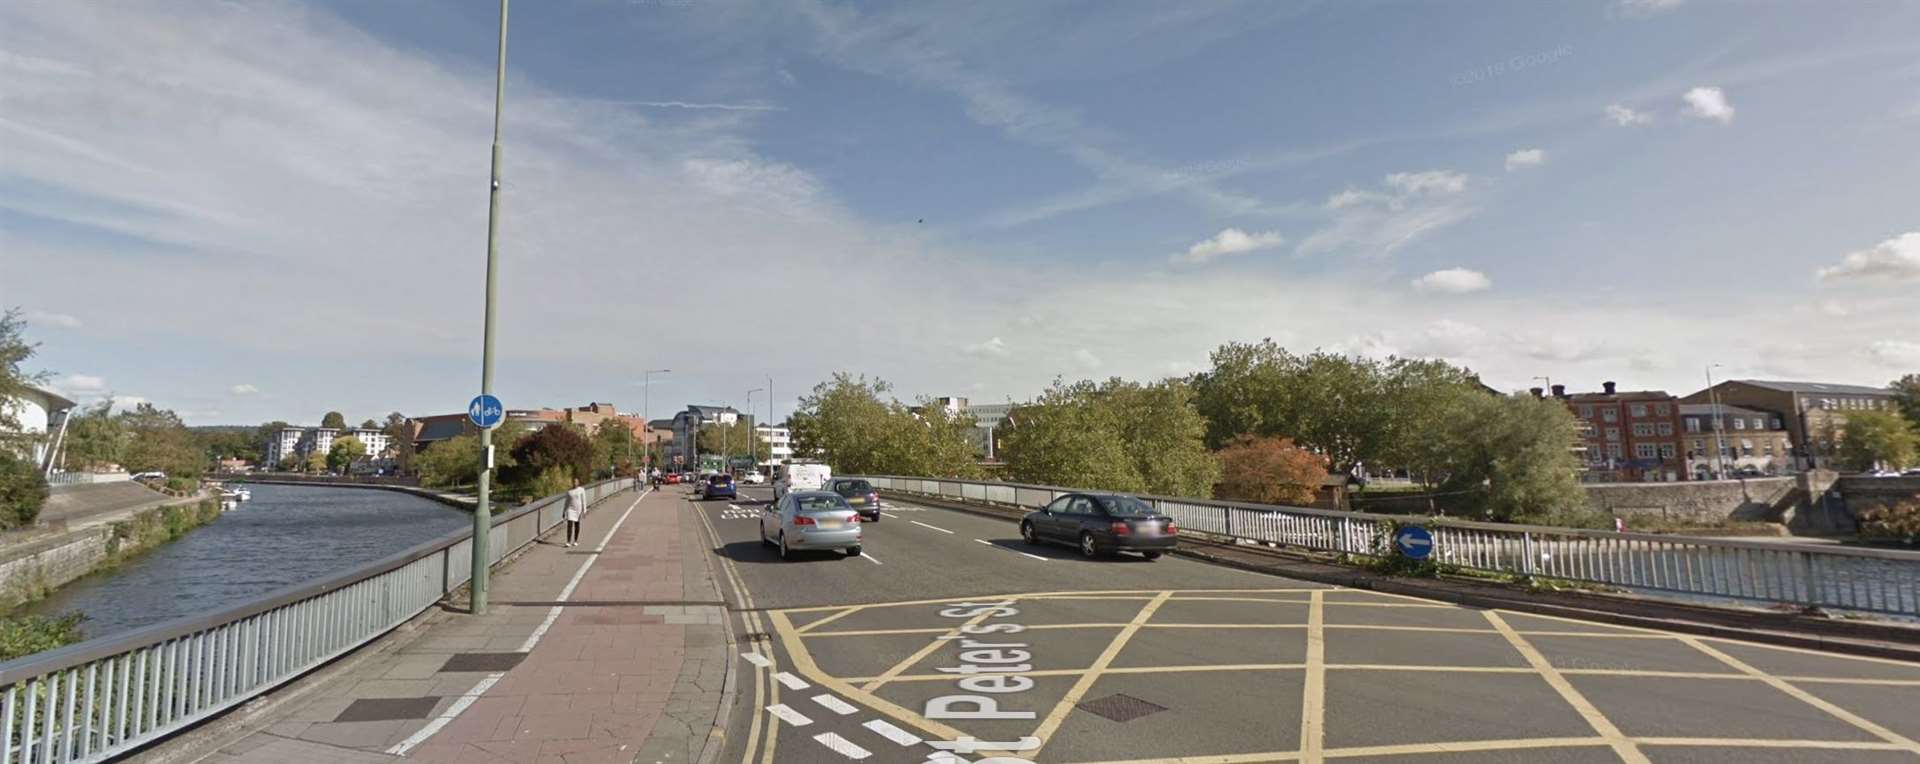 Man arrested after police seize drugs from a car on St Peter's Street near the River Medway. Picture: Google Street View